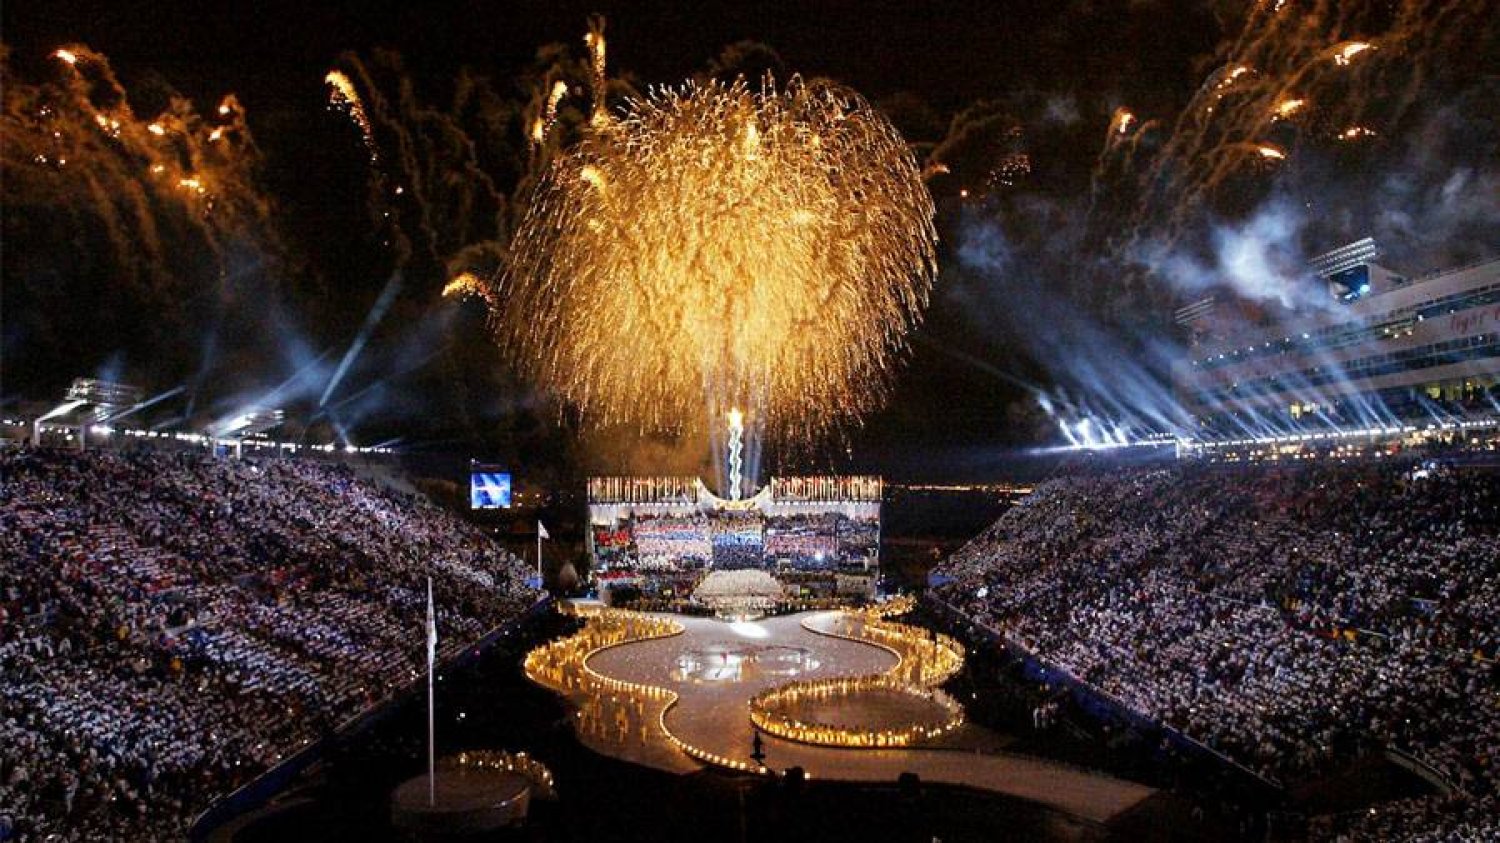 Fireworks fill the night sky 08 February 2002 during the opening ceremonies of the XIXth Winter Olympics at the Rice Eccles Stadium in Salt Lake City, Utah. (AFP via Getty Images)